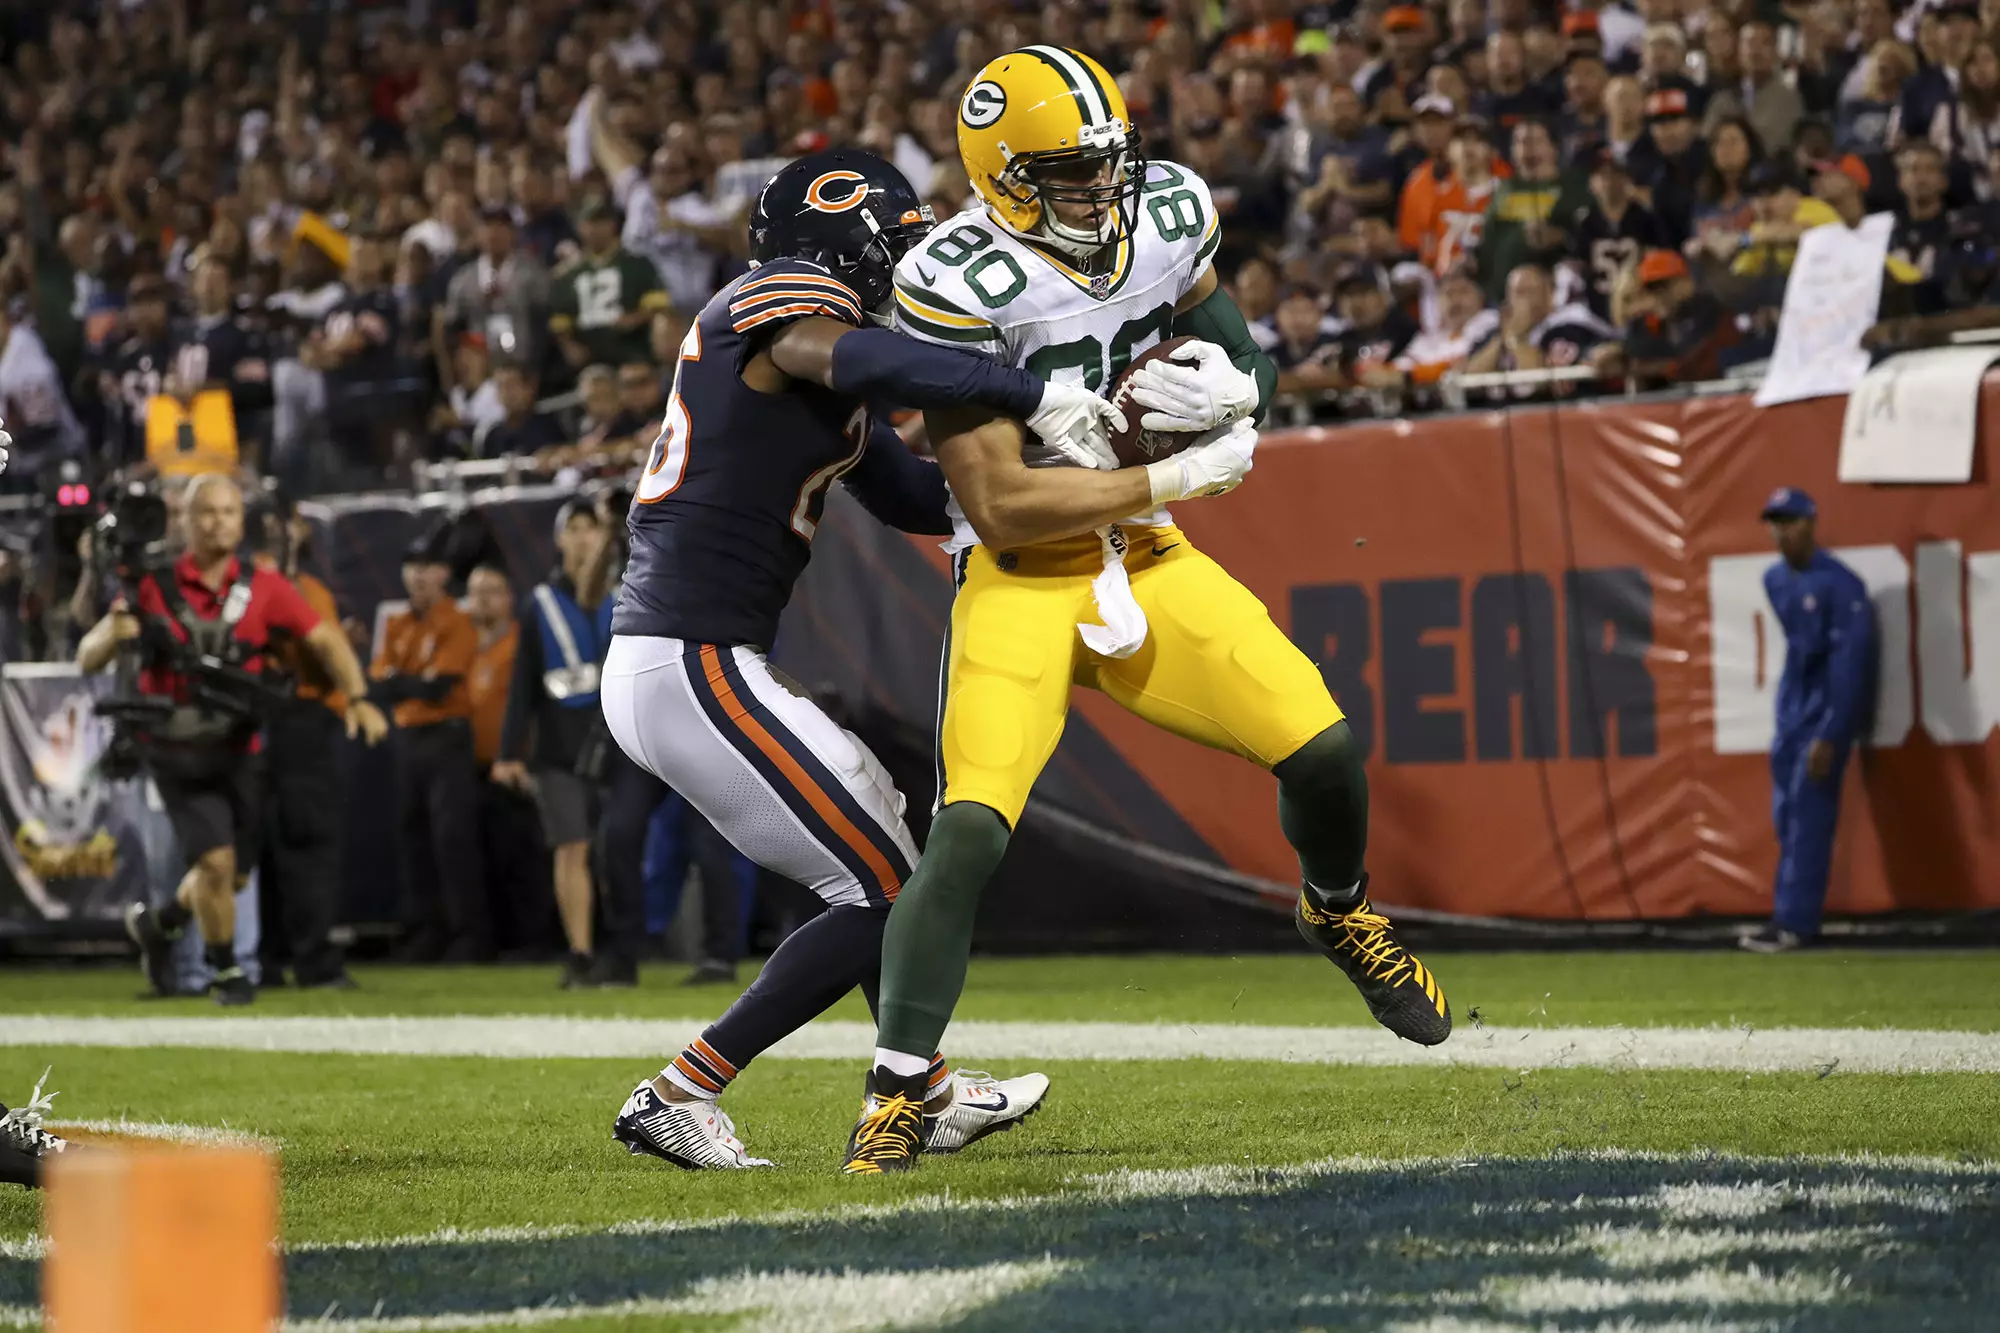 Jimmy Graham scored the only touchdown of the night in Green Bay's win at Soldier Field